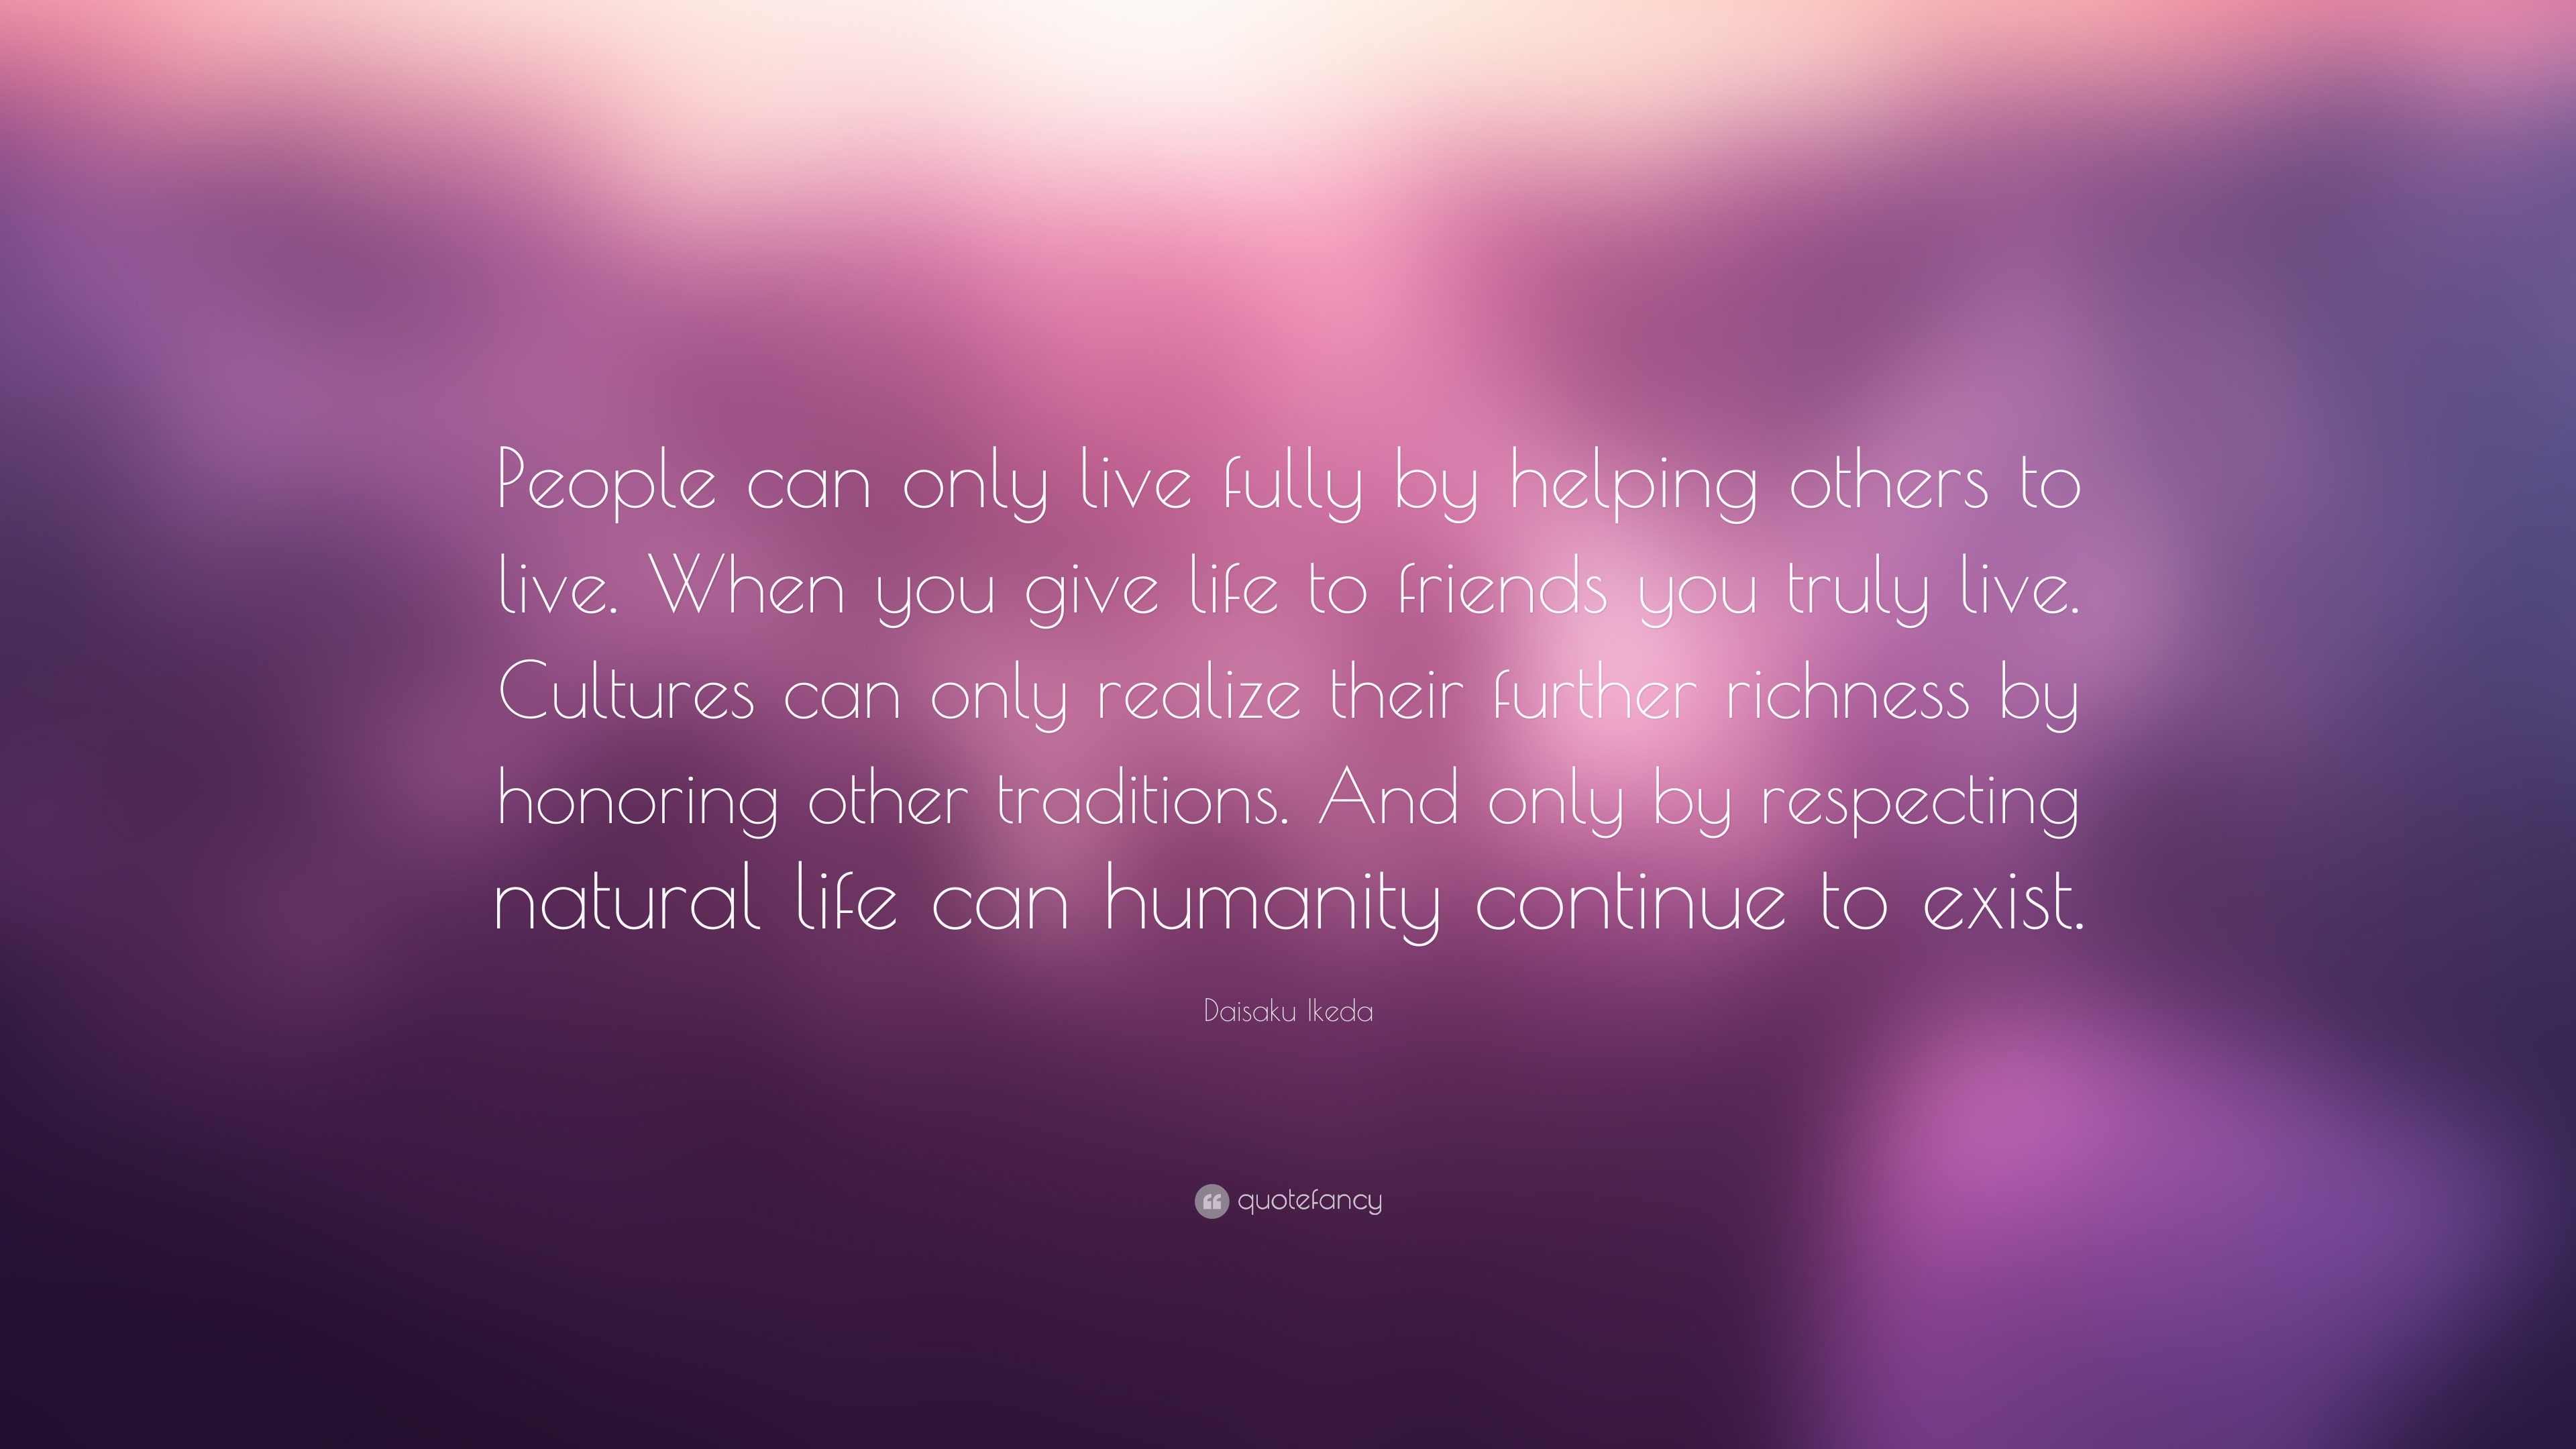 Daisaku Ikeda Quote “People can only live fully by helping others to live